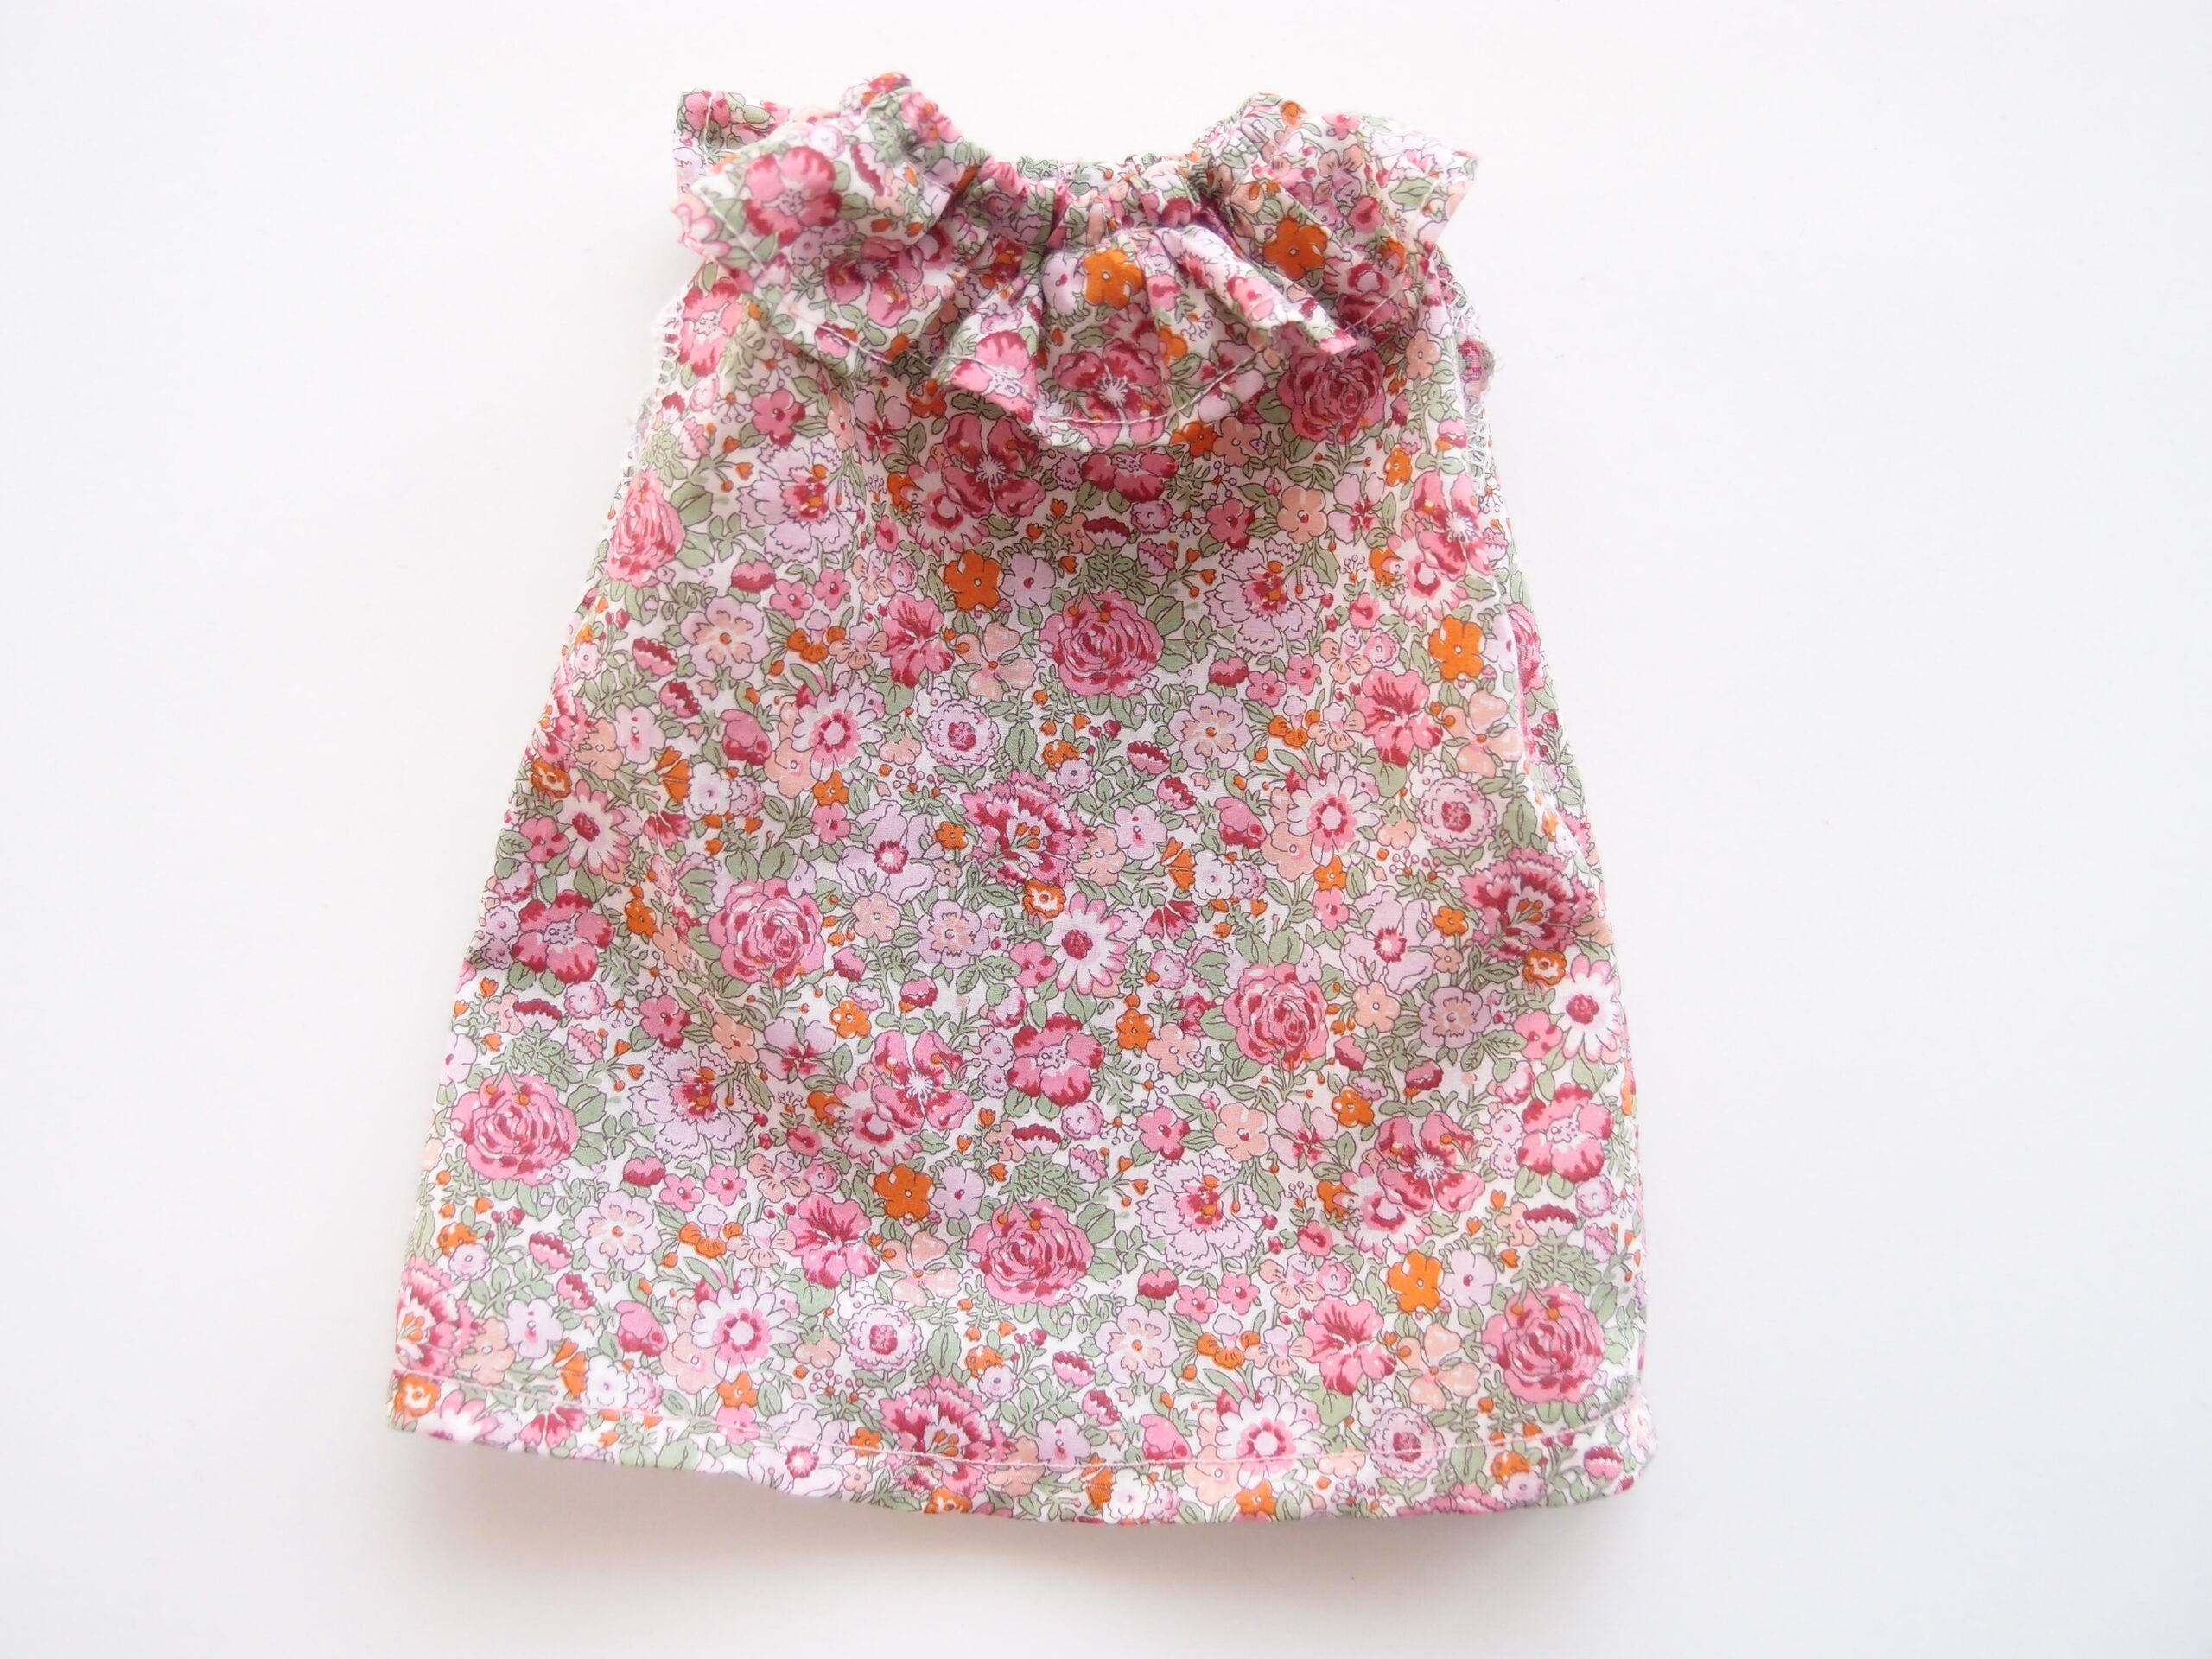 dress for a handmade doll made from Liberty fabric